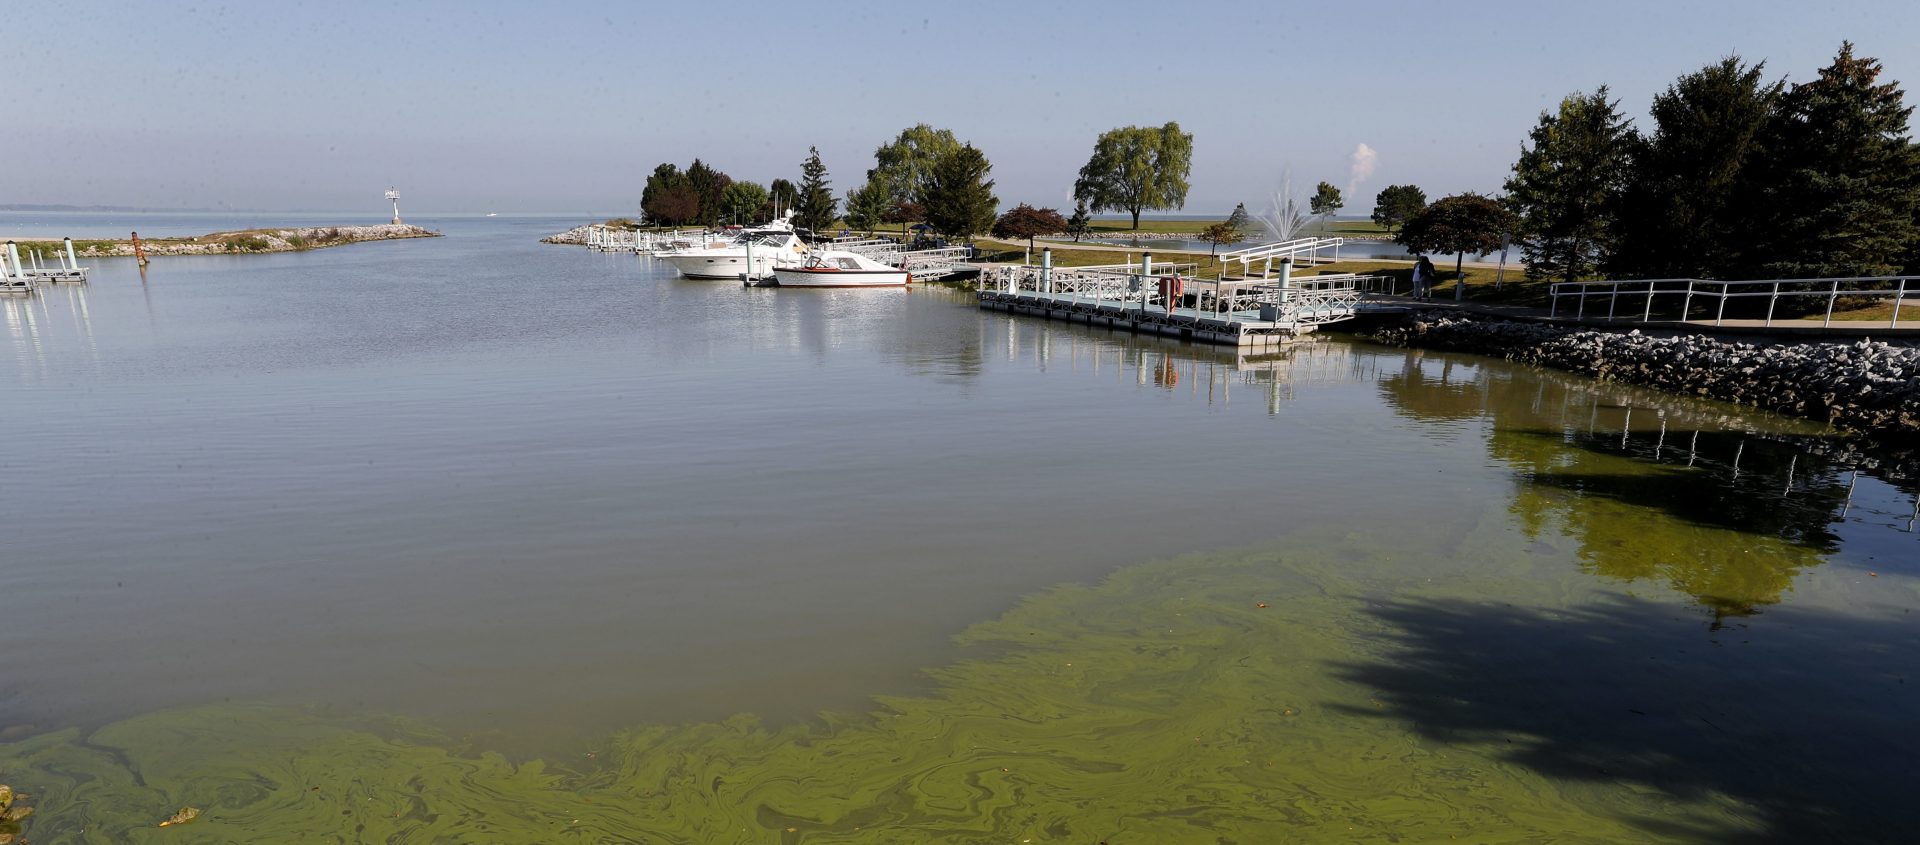 FILE - In this Sept. 15, 2017, file photo, algae floats in the water at the Maumee Bay State Park marina in Lake Erie in Oregon, Ohio. 